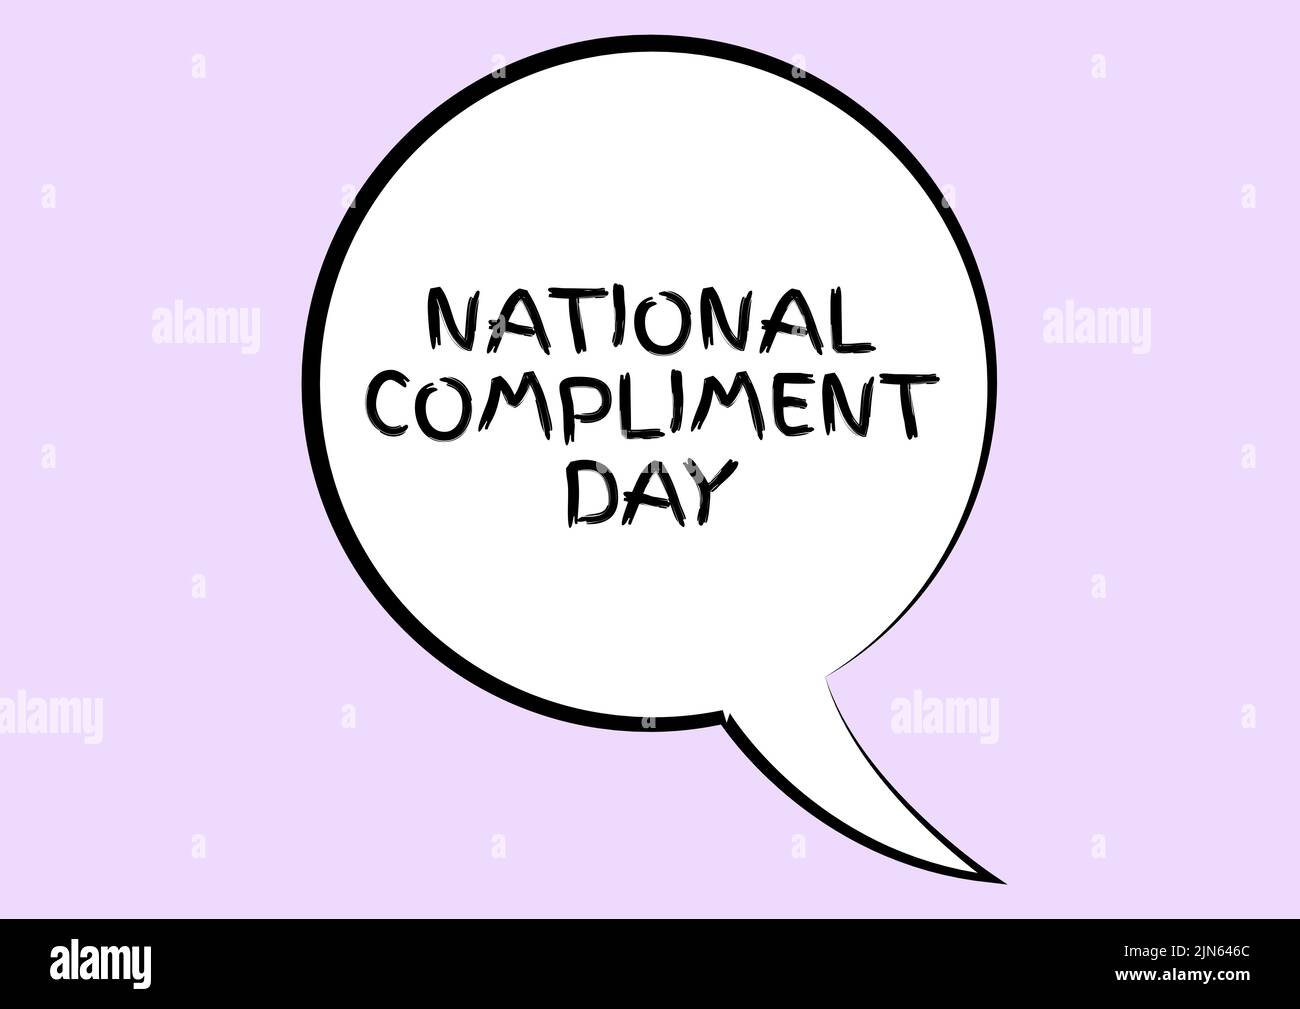 Composition of national compliment day text in speech bubble on purple backgorund Stock Photo